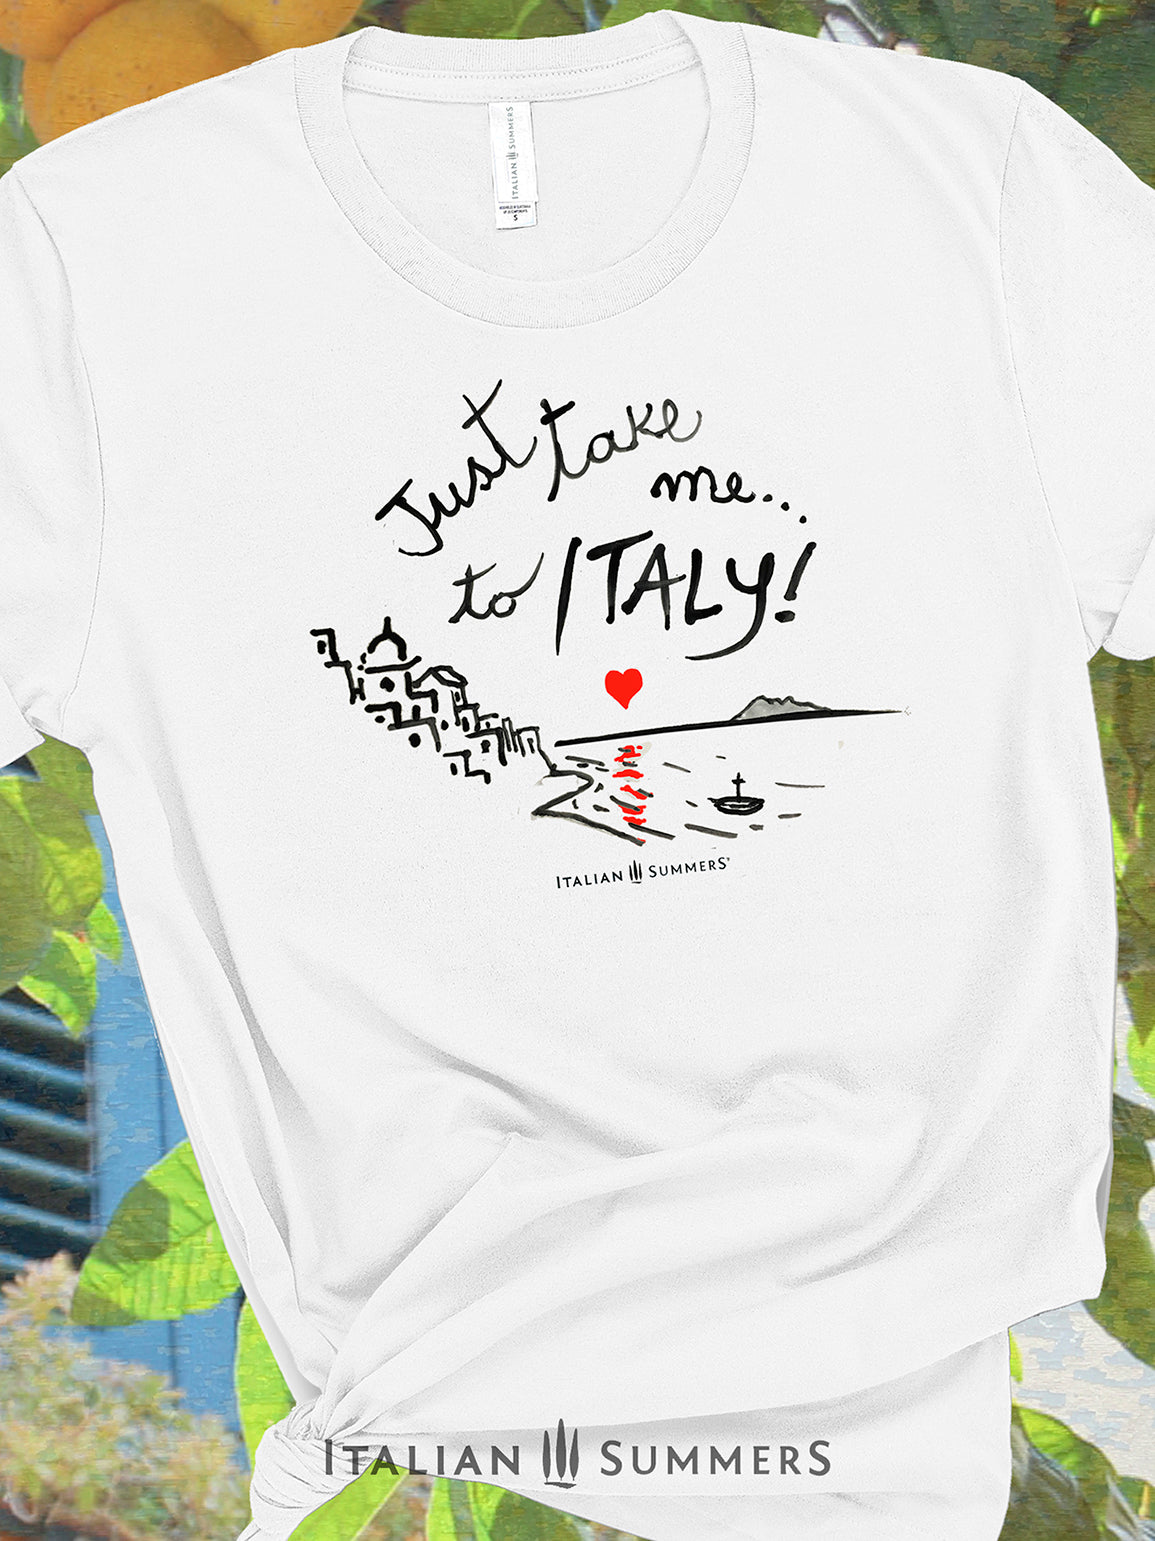 Italy-inspired Unisex crew neck T shirt with a prit of a hand-painted  stylized Amalfi Coast village with a red heart setting on the sea and reflecting its glow on the waters. The hand-painted phrase "Just take me to Italy" is above the composition